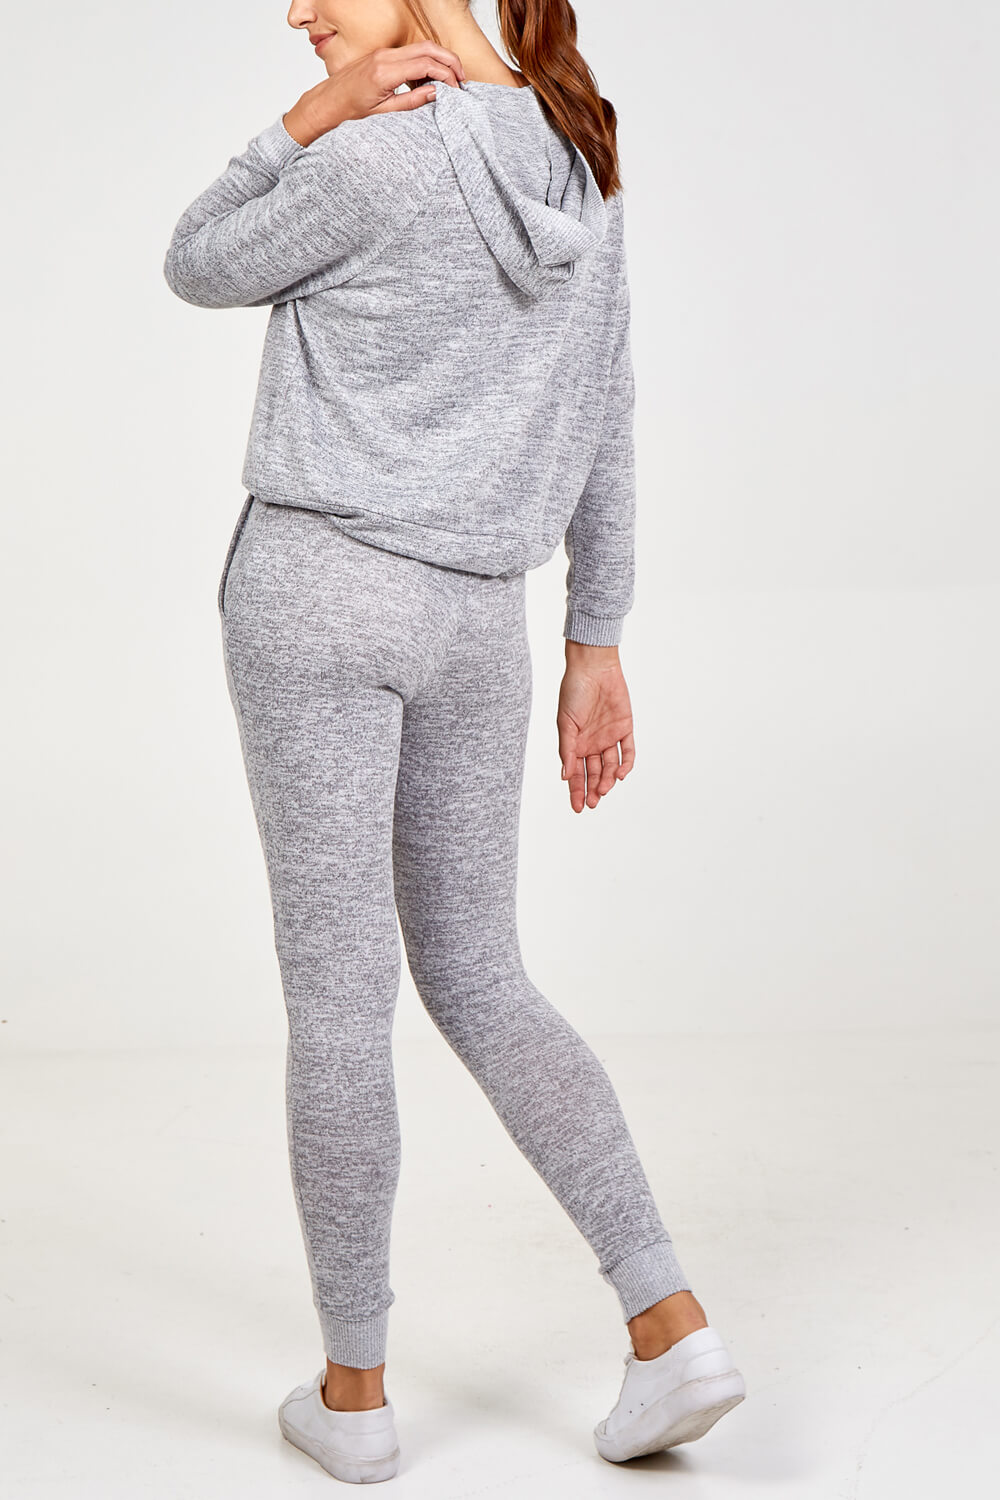 Light Grey Tie Front Hooded Lounge Top, Image 3 of 3